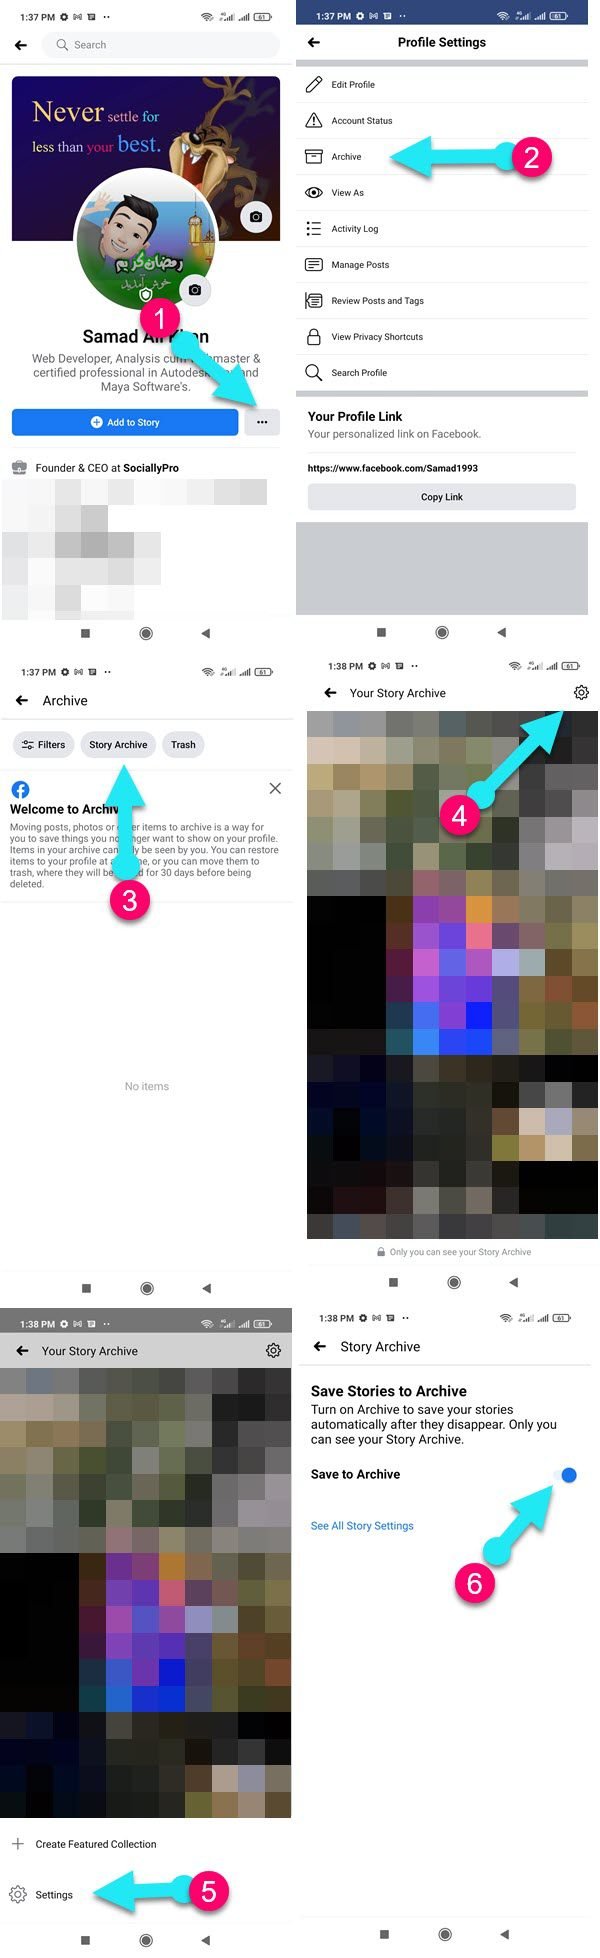 Enable or disable story archive In the latest Facebook app